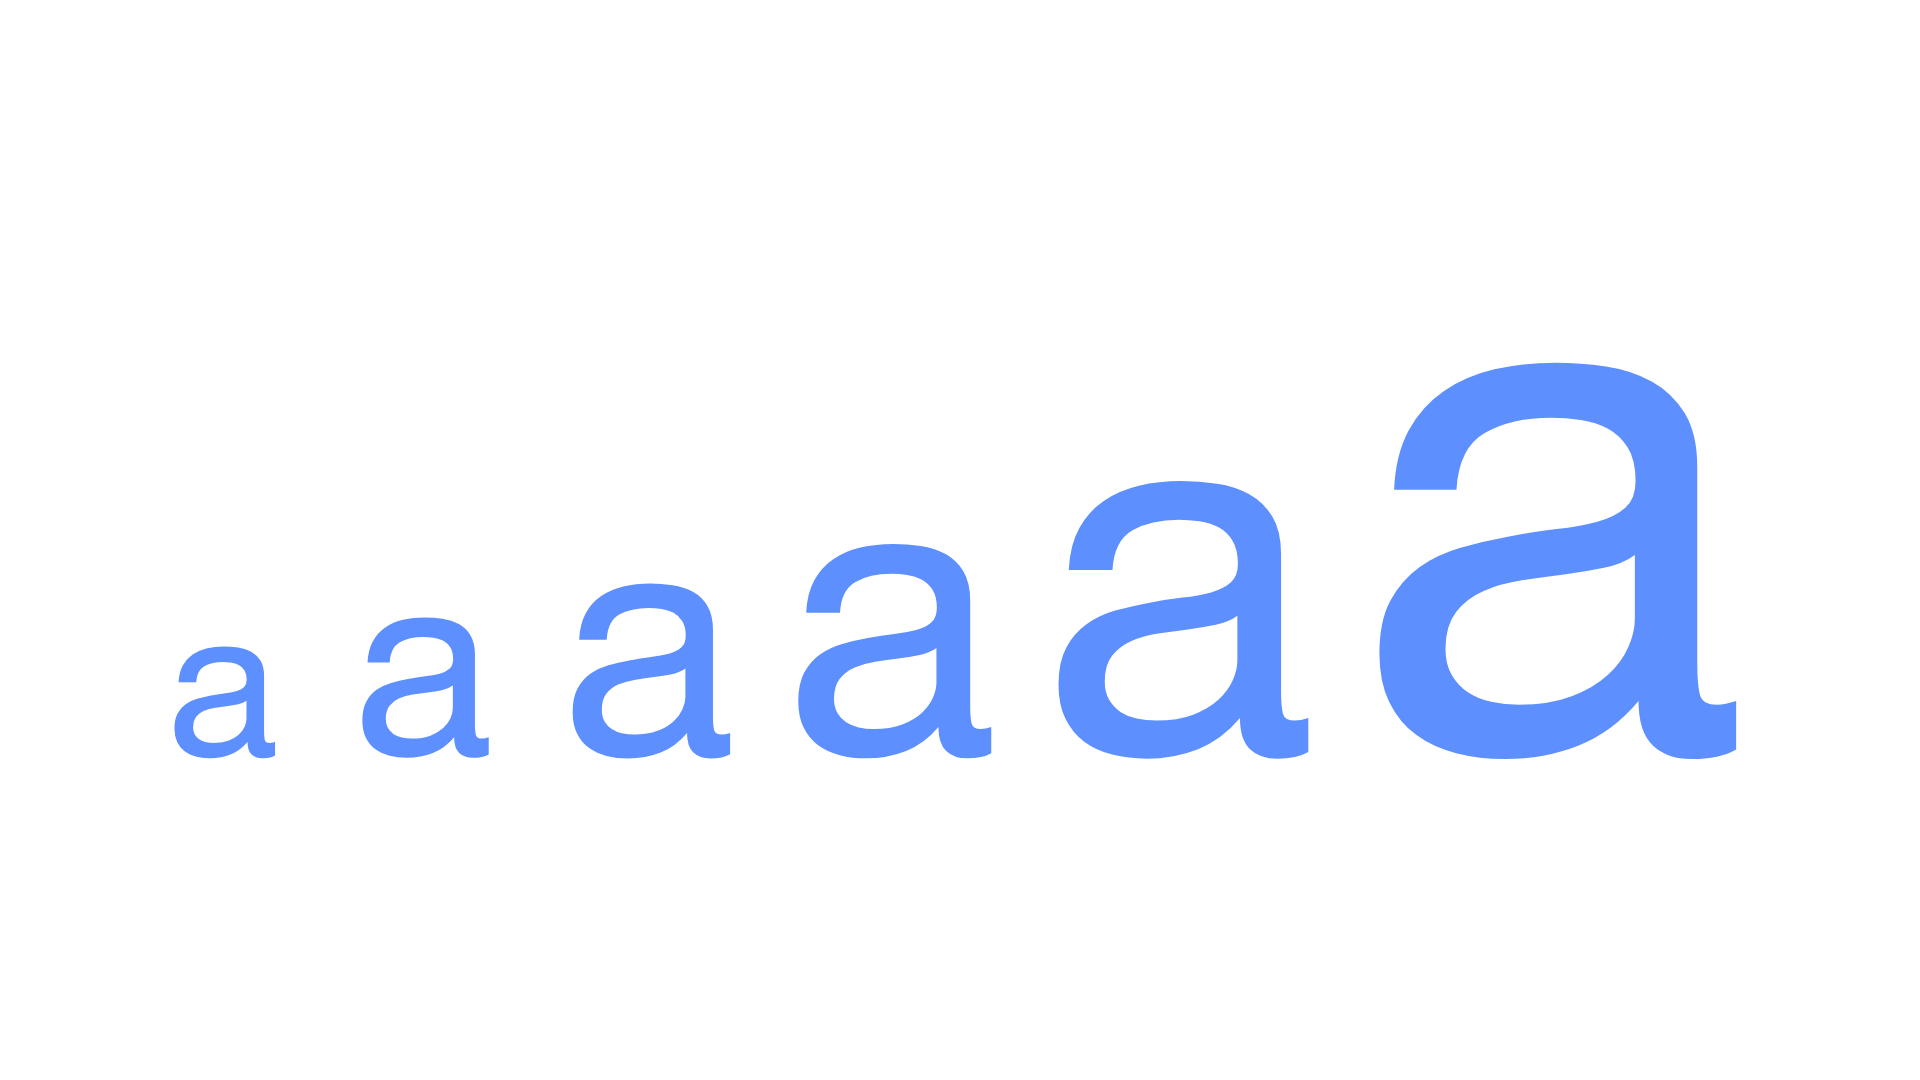 The letter A is depicted in varying sizes, ranging from small to large.